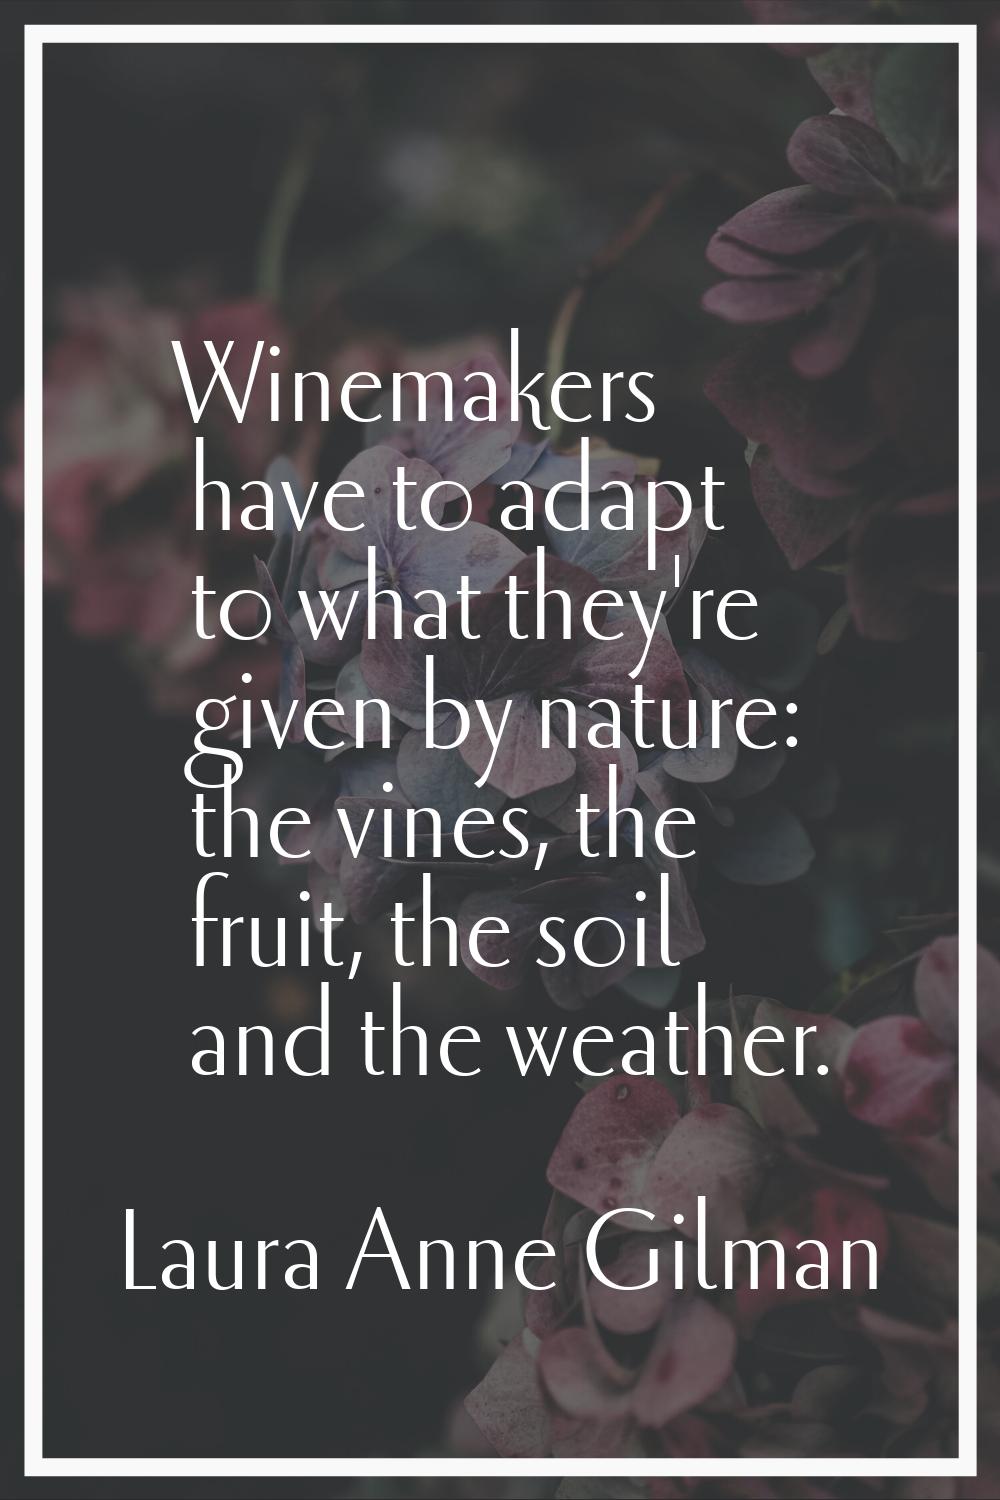 Winemakers have to adapt to what they're given by nature: the vines, the fruit, the soil and the we